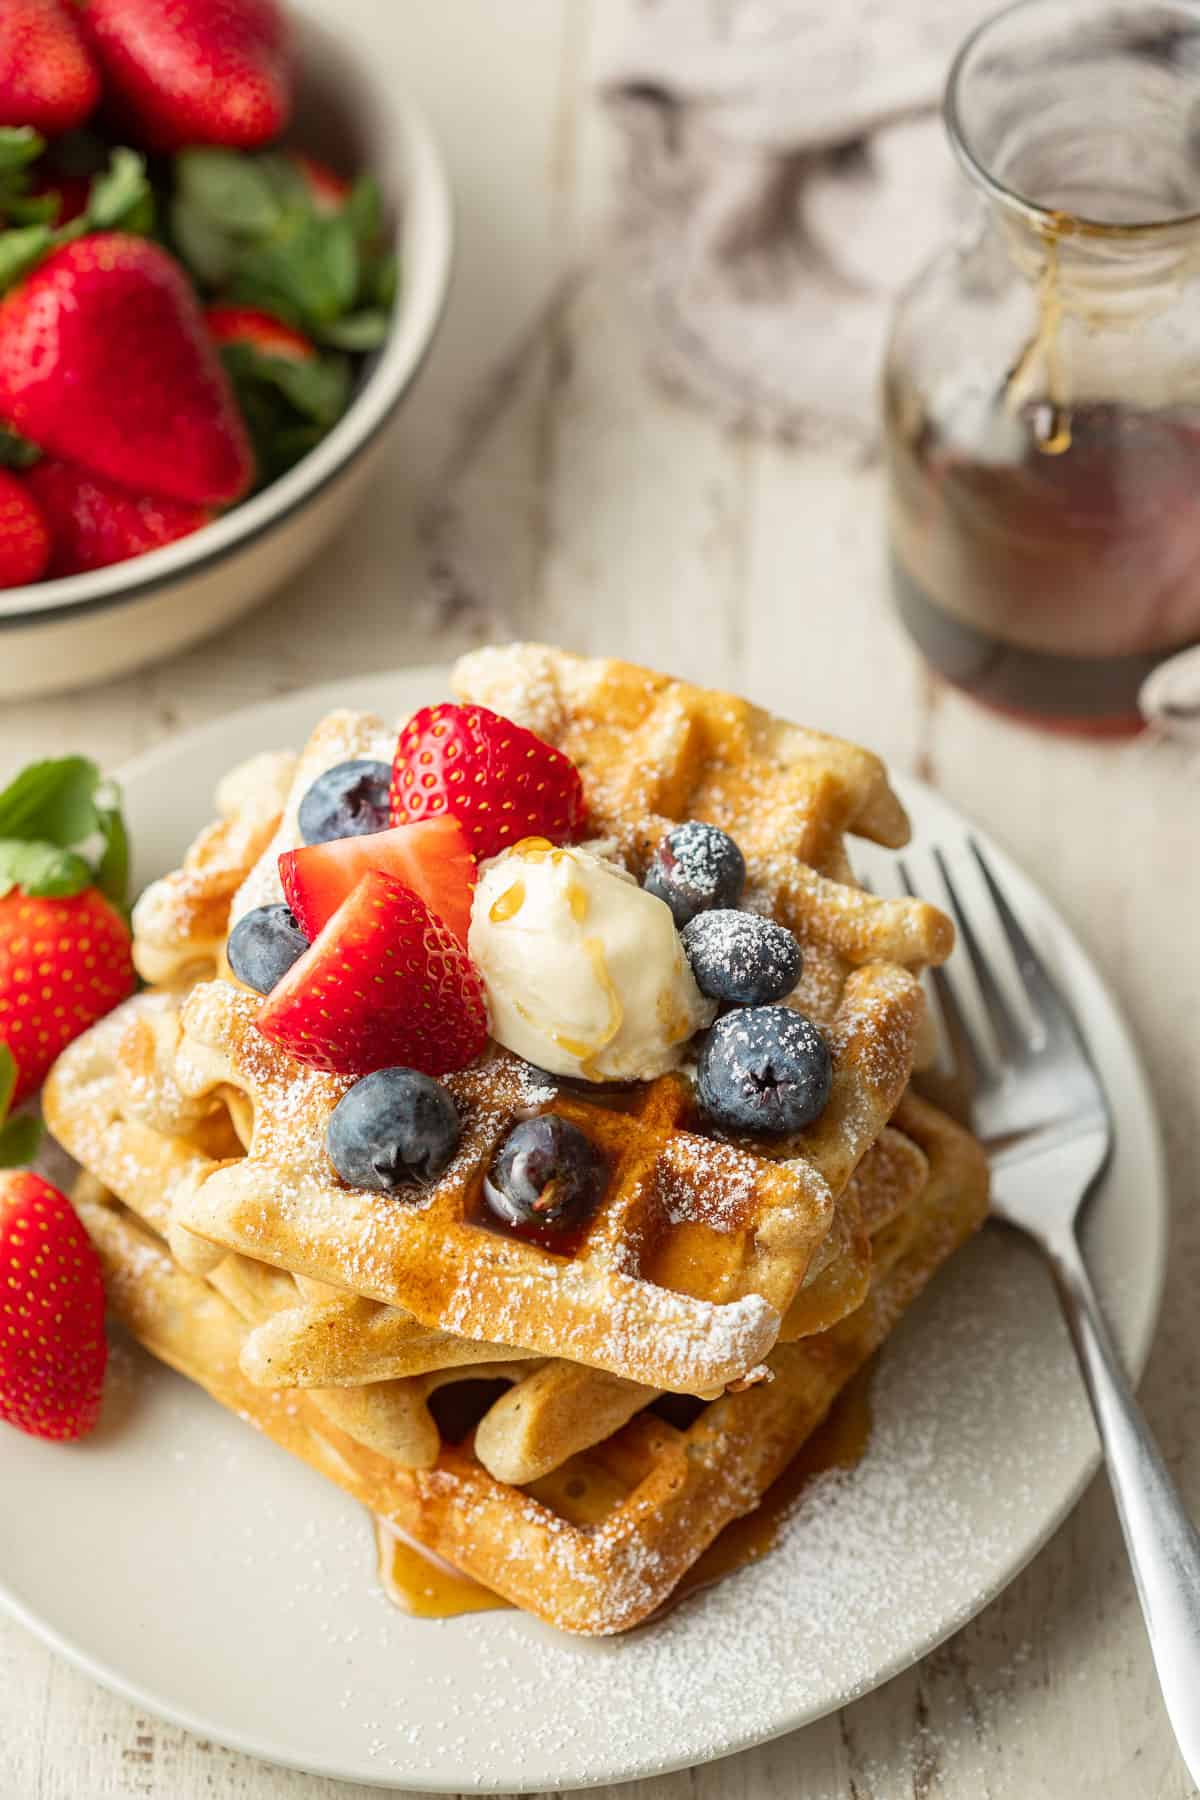 A stack of vegan waffles on a plate with strawberries and syrup in the background.